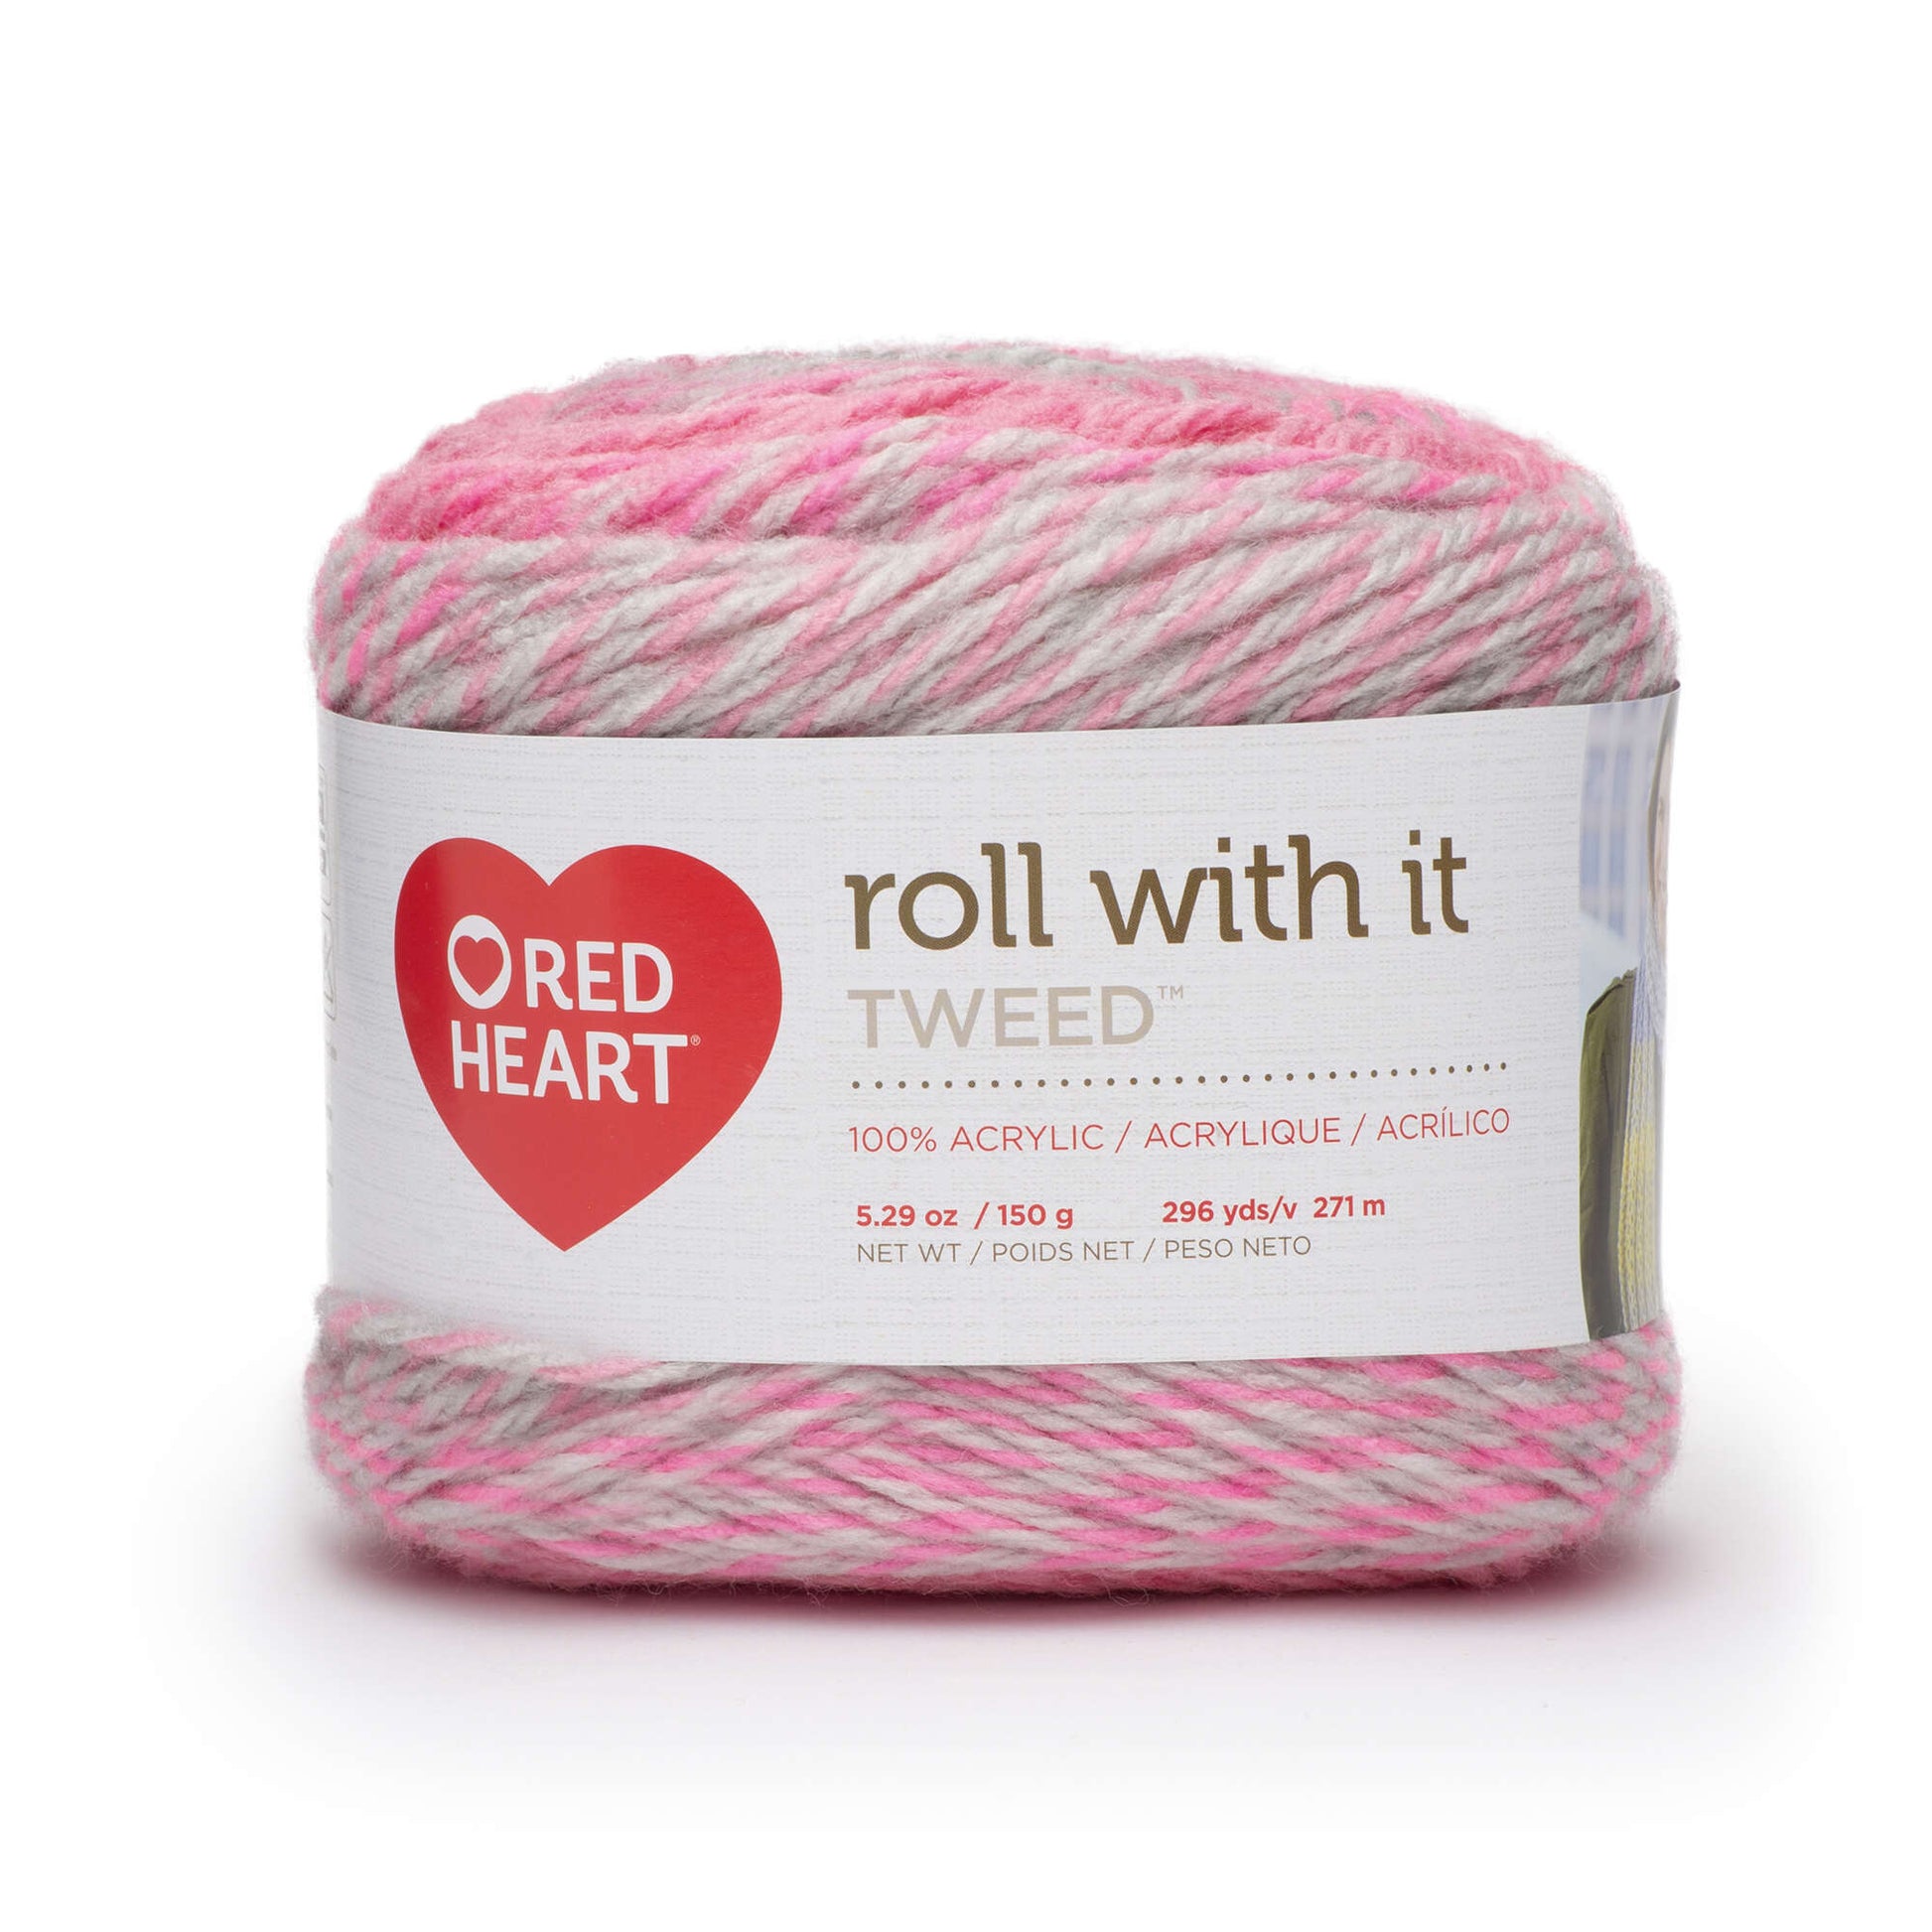 Red Heart Roll With It Tweed Yarn - Clearance shades Popular Pink